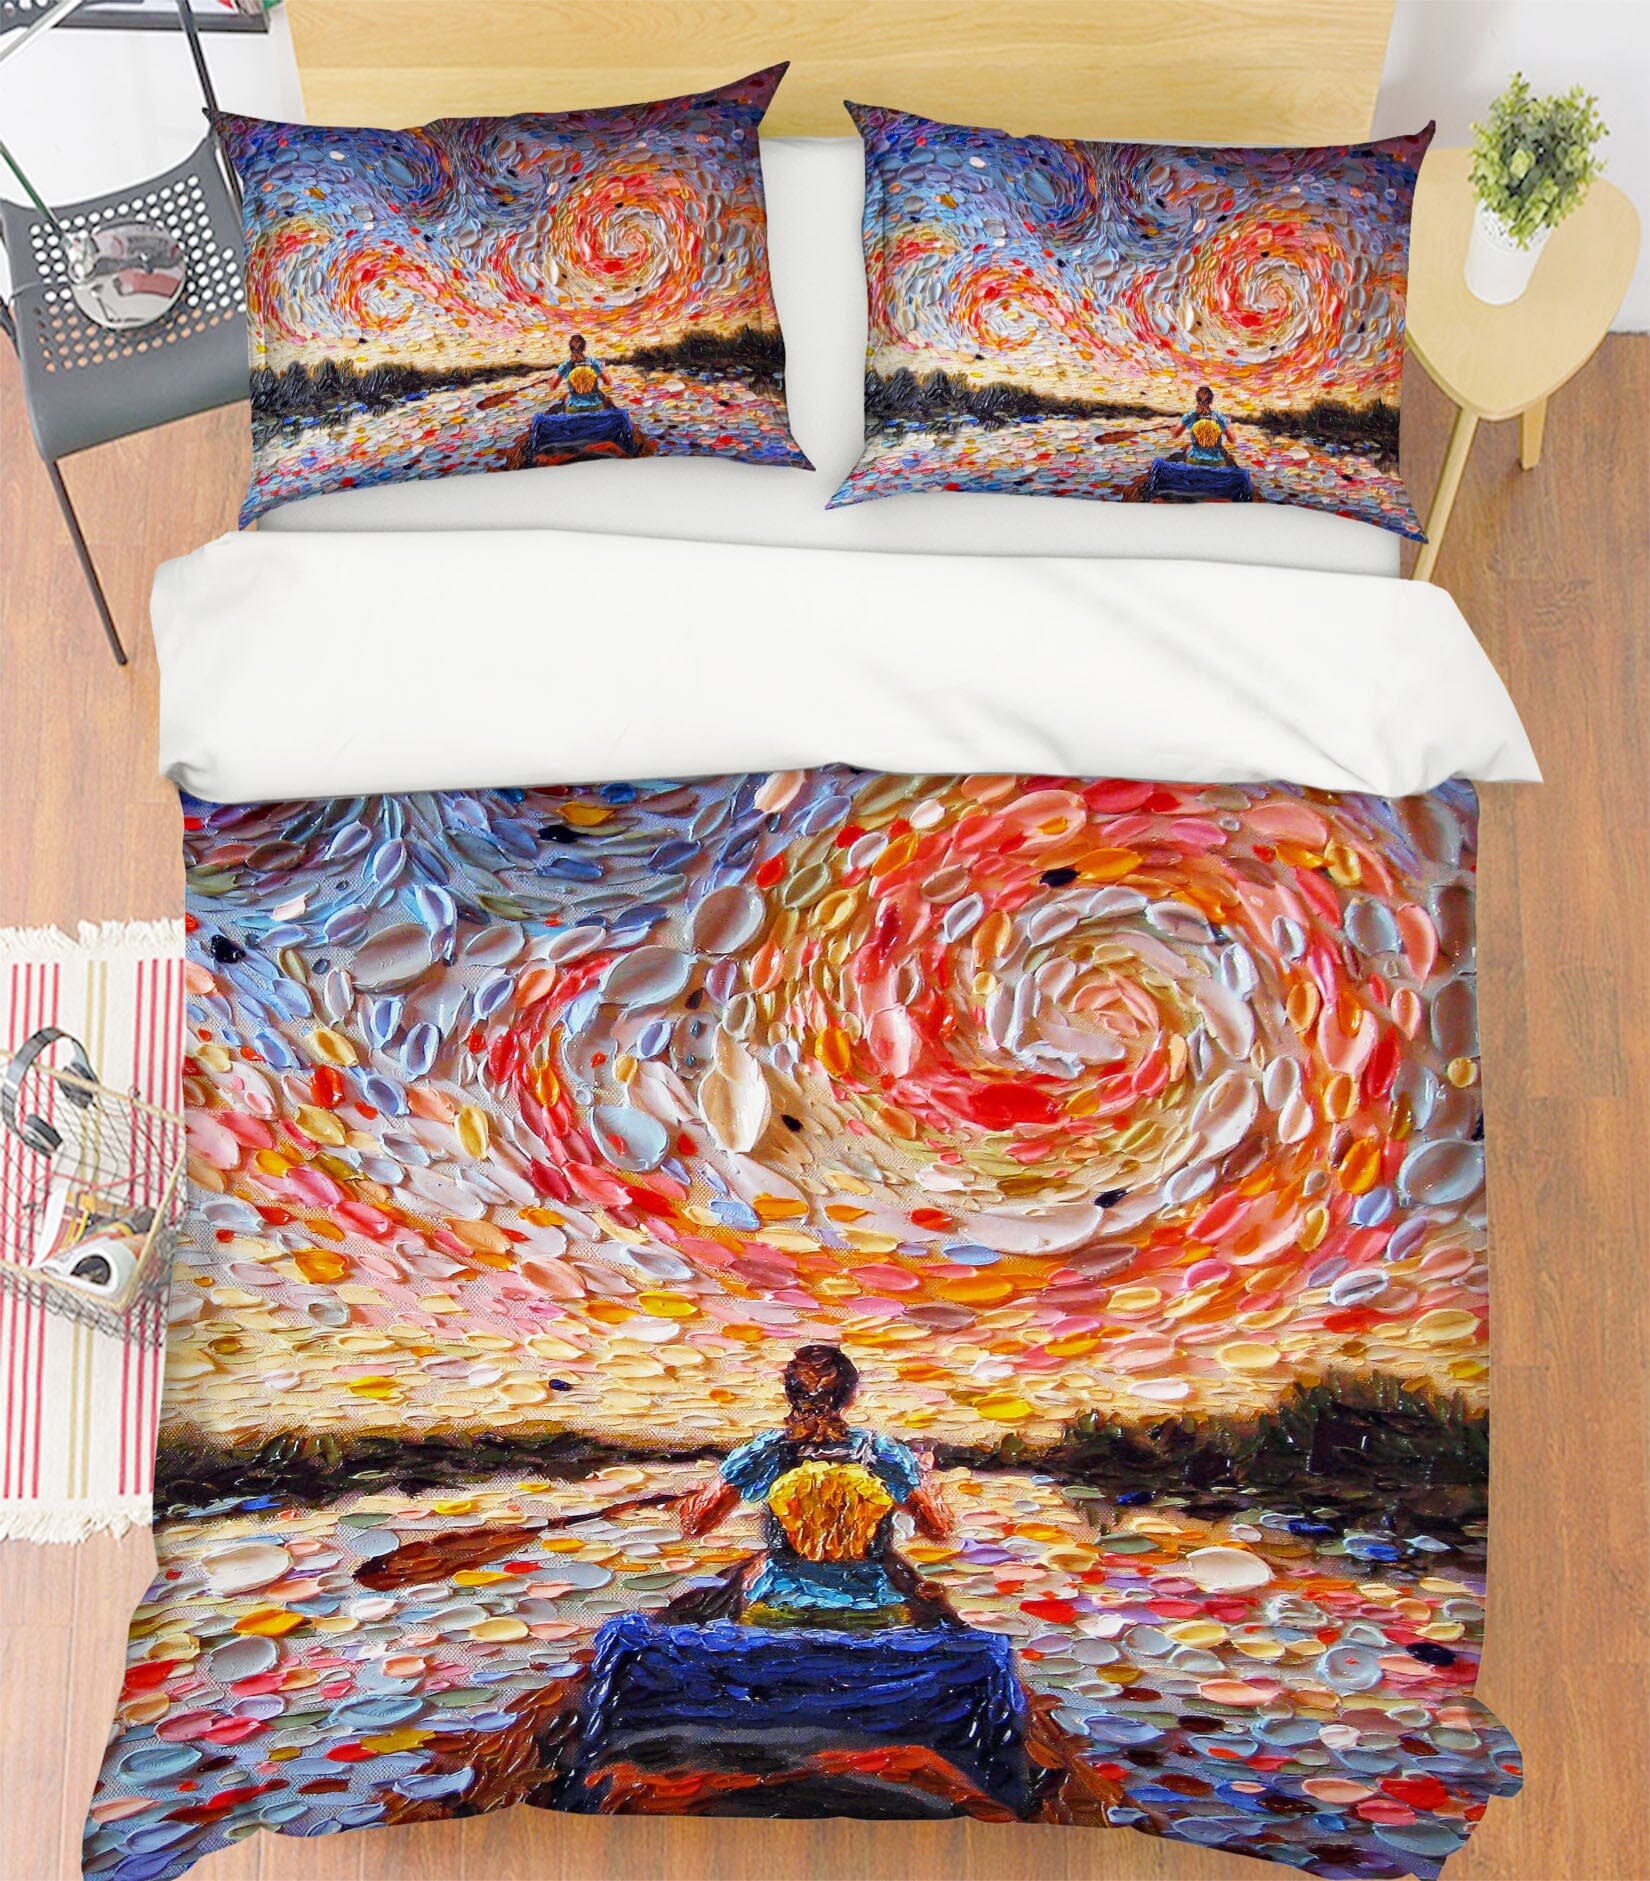 3D Fishing Girl 2101 Dena Tollefson bedding Bed Pillowcases Quilt Quiet Covers AJ Creativity Home 